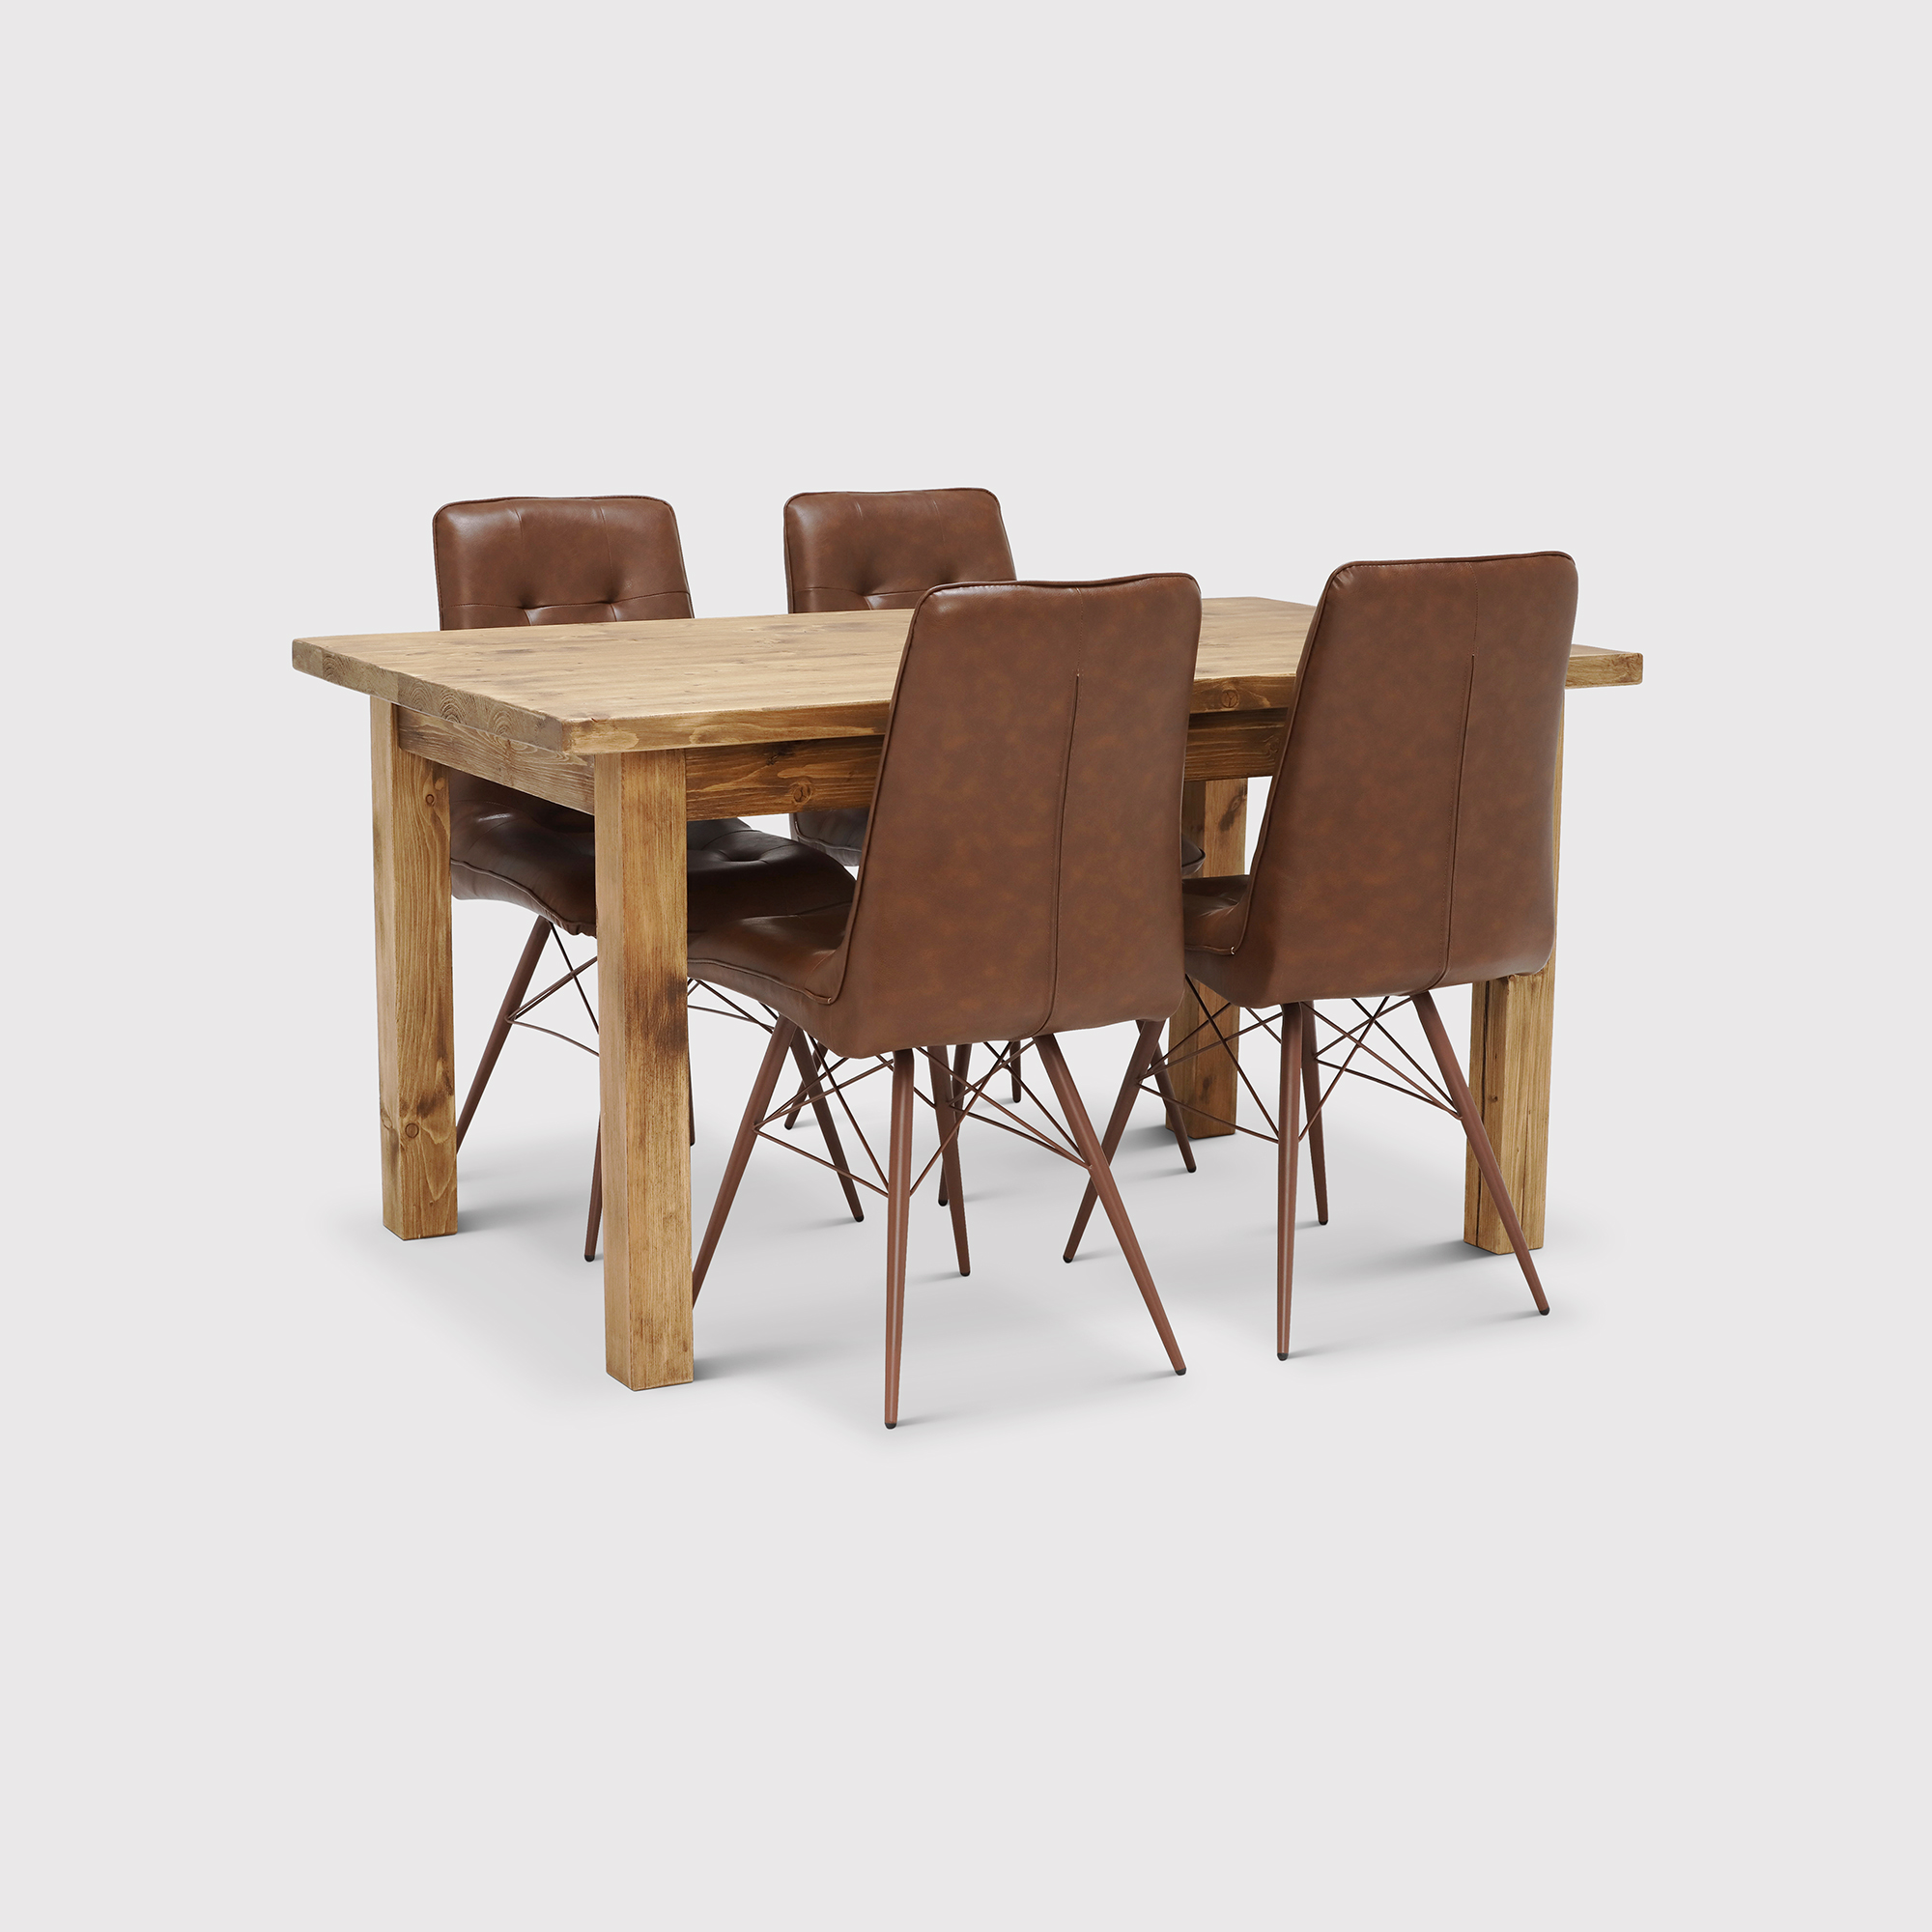 Covington Dining Table & 4 Hix Chairs, Brown | Barker & Stonehouse